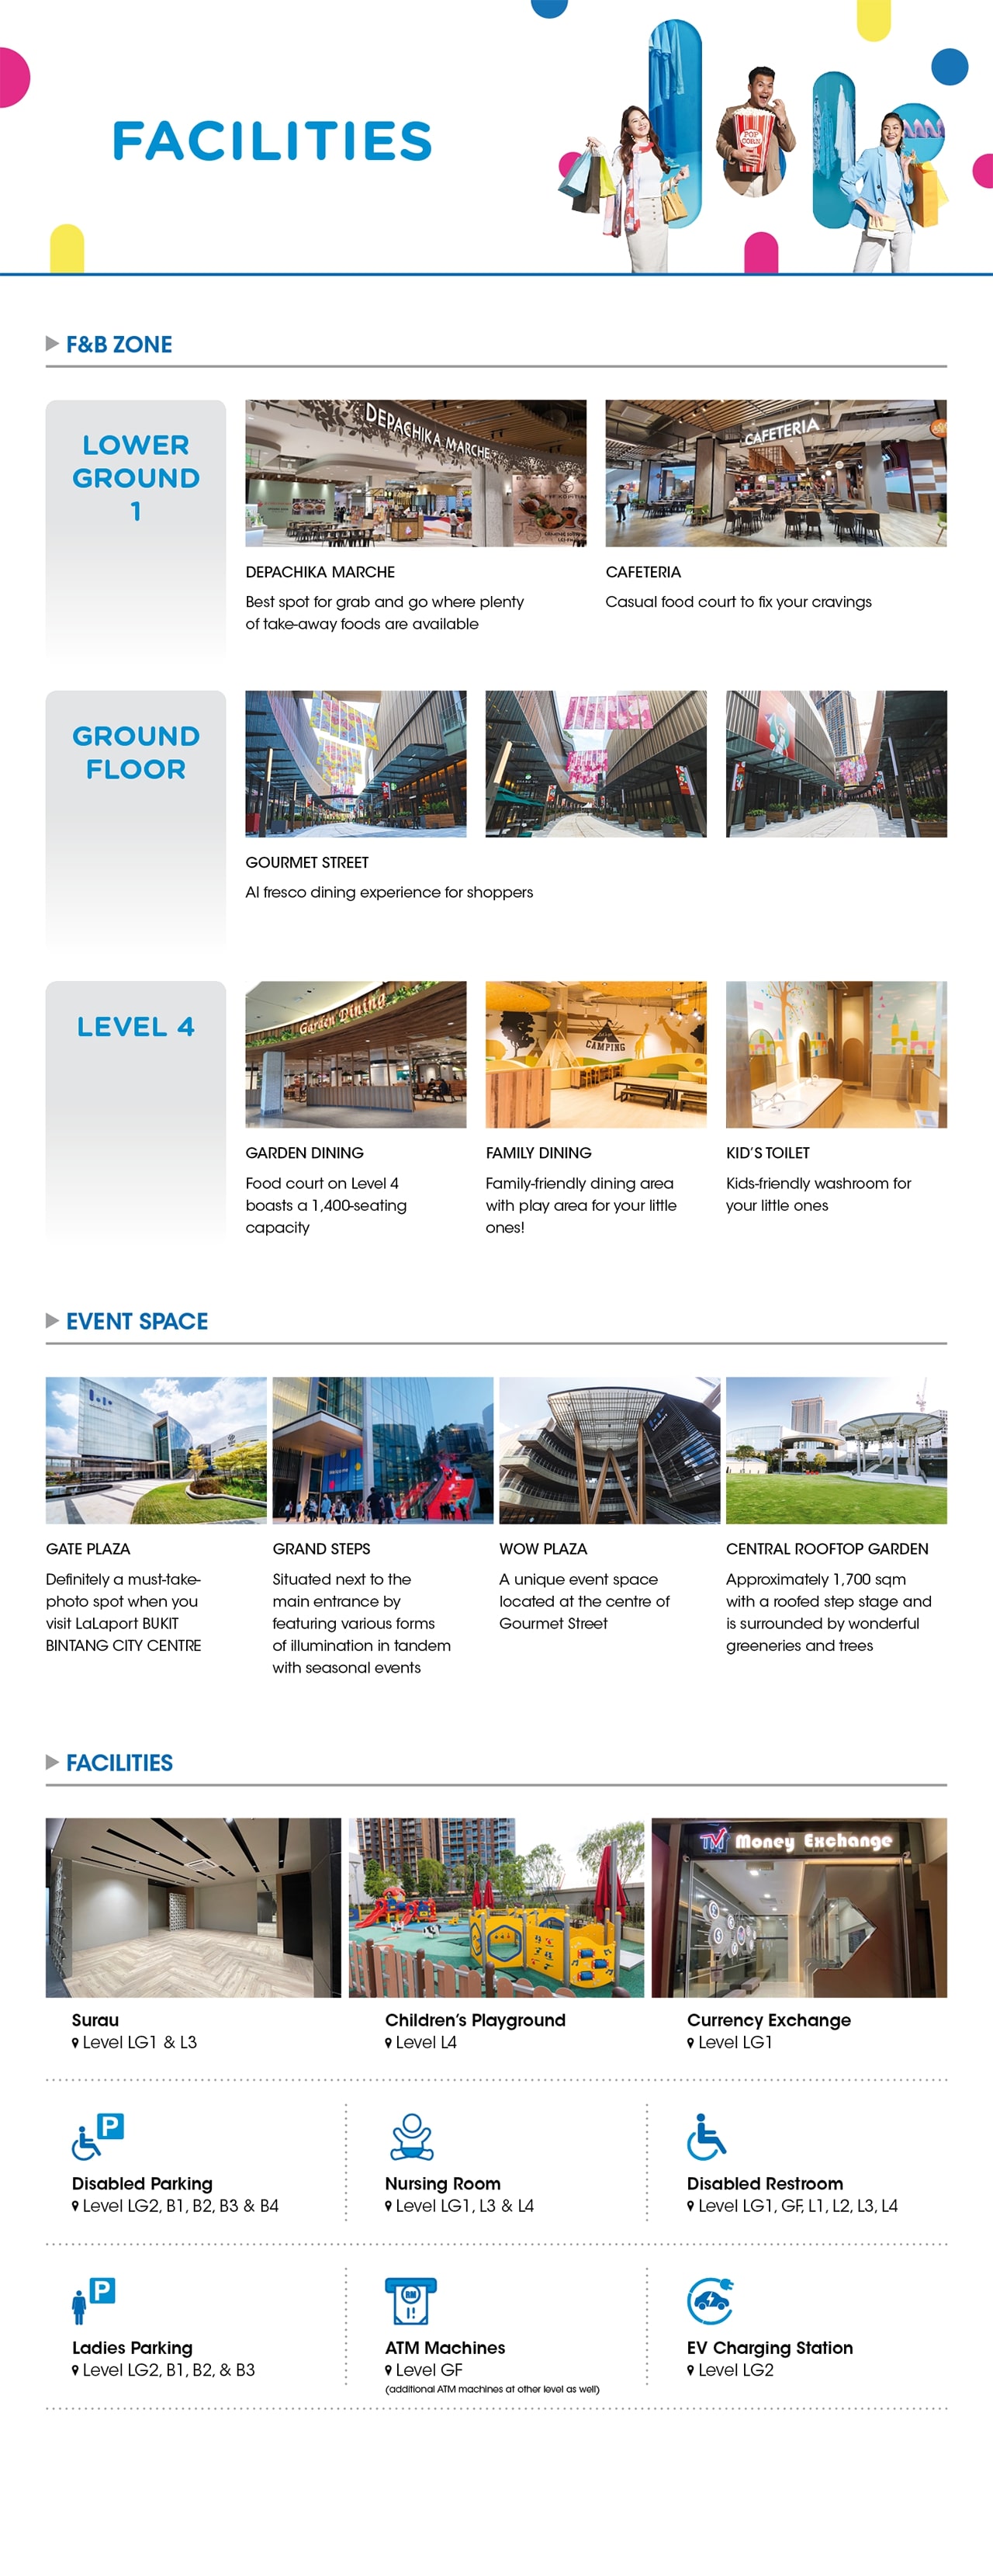 LLP Landing Page - SERVICES Facilities.jpg